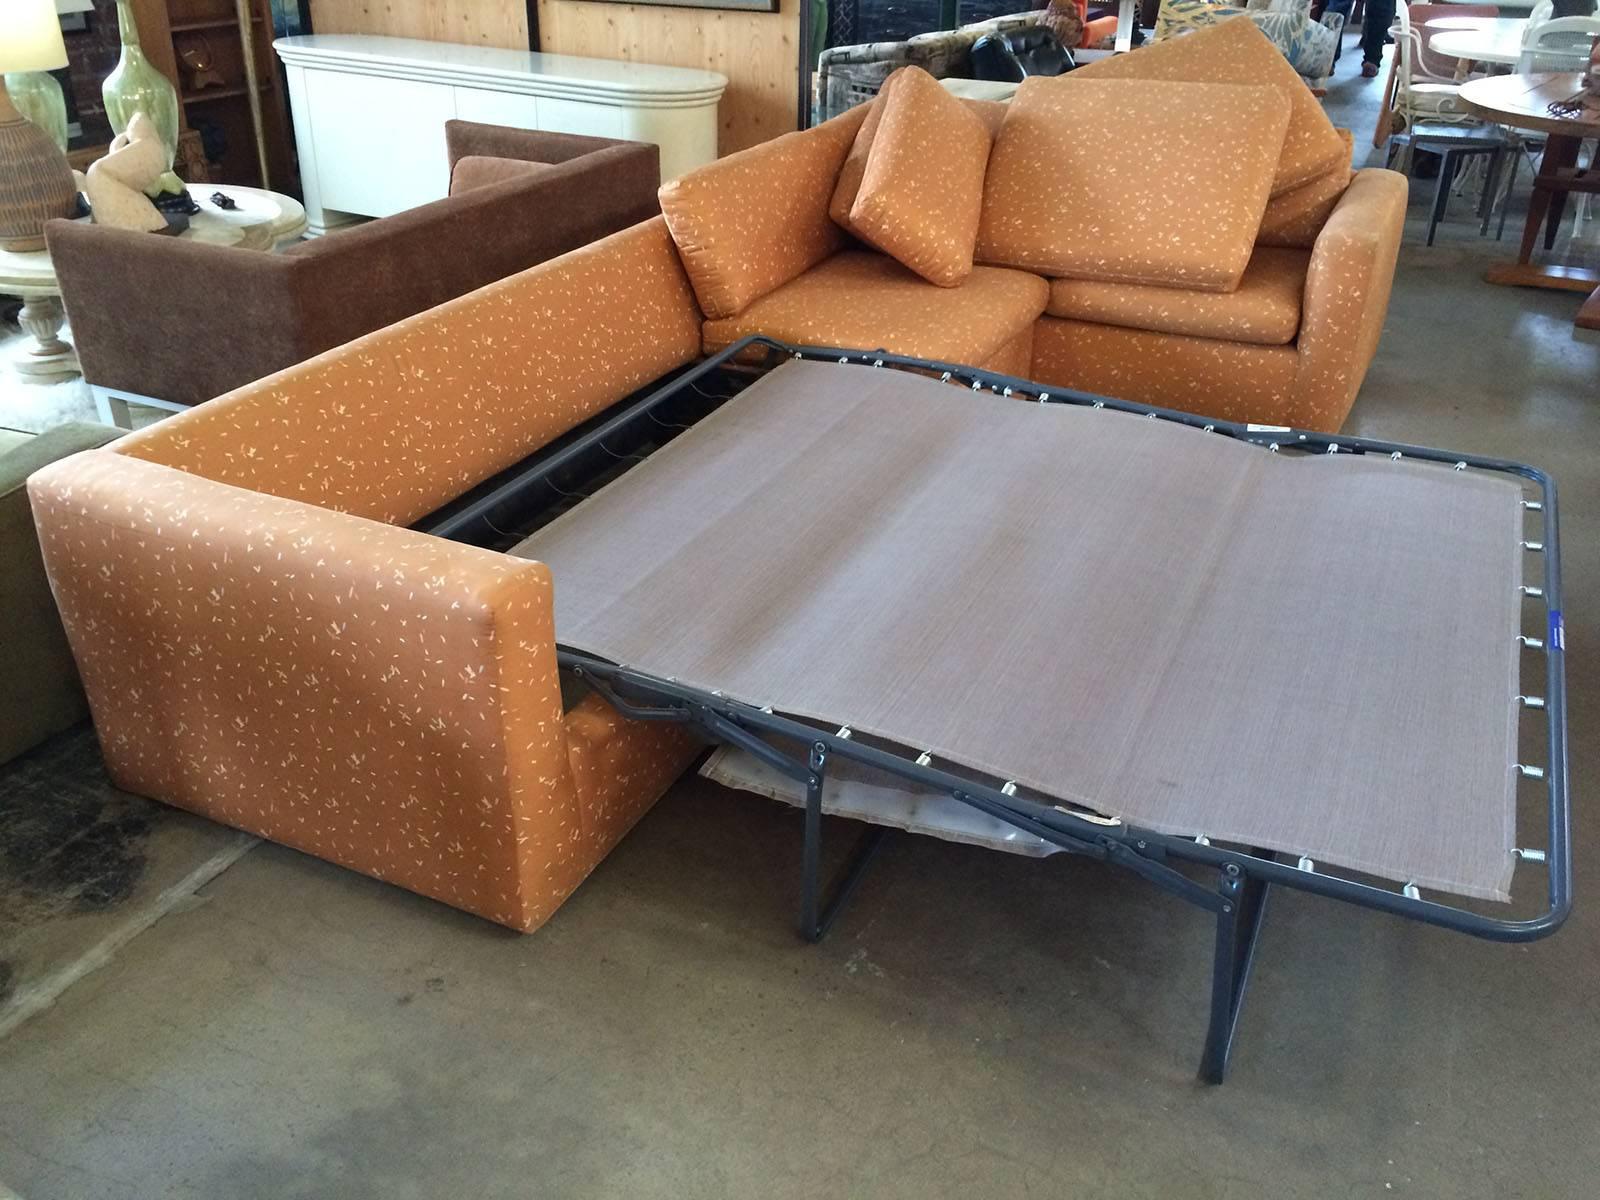 Large sectional sofa with pullout bed by Rothstein. Sofa is upholstered in playful orange/rust colored fabric. The pullout bed measures 63 wide X 37 long X 17 high, the small sofa section is 70 wide X 36 deep X 25 high X 17 seat height and the large